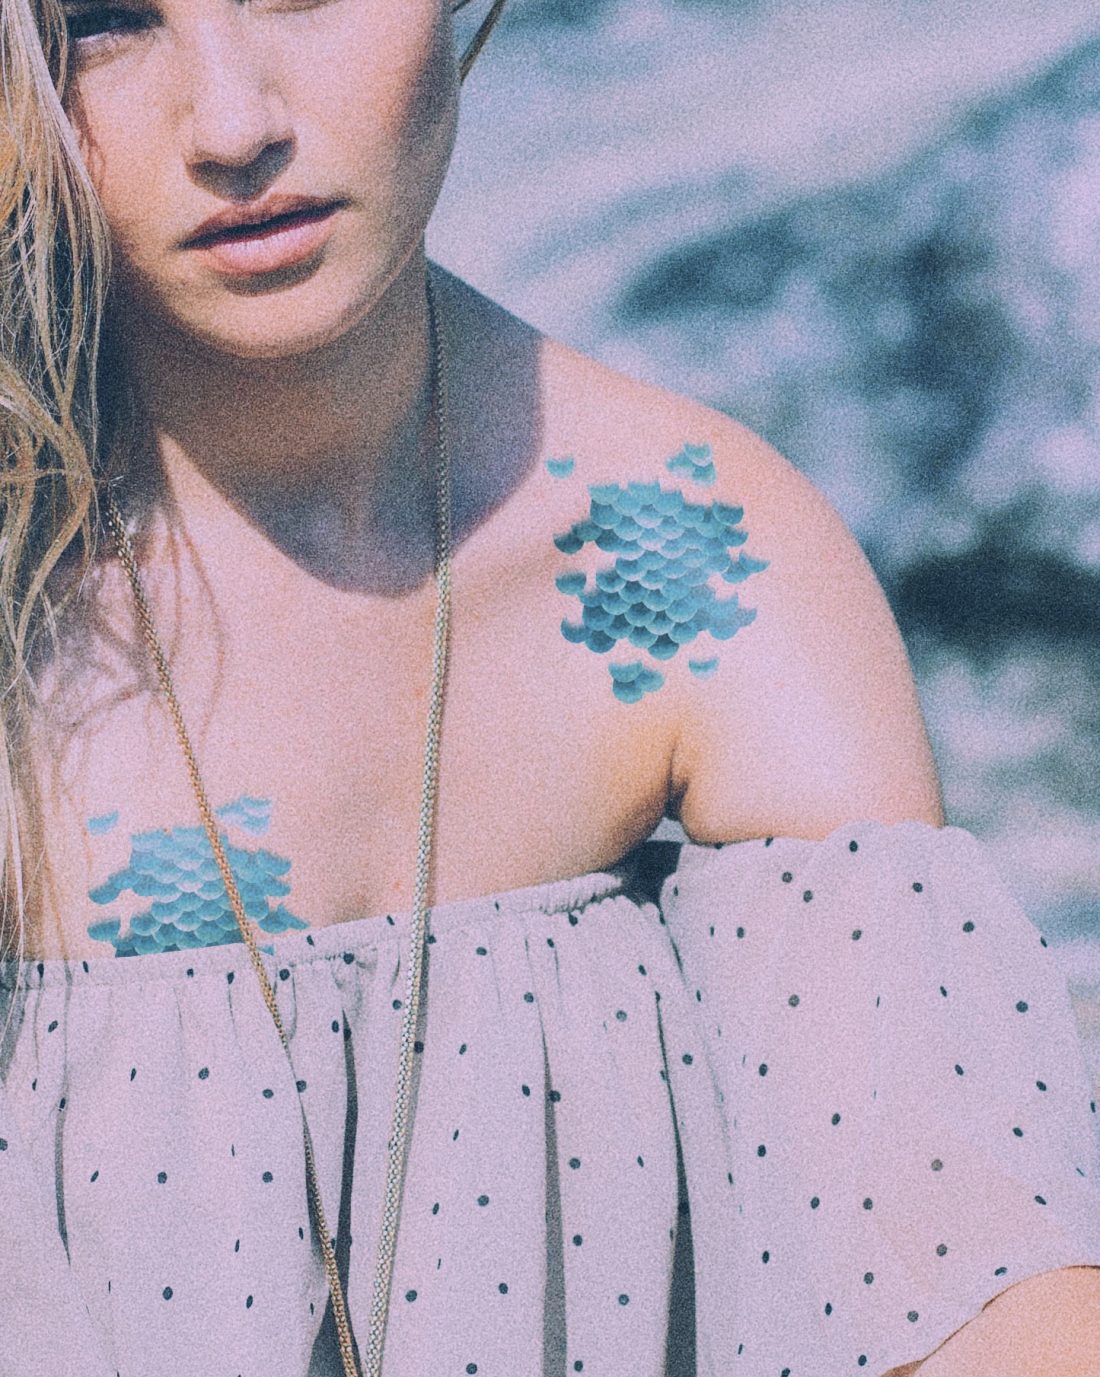 Woman wearing necklace and mermaid scale temporary tattoos.